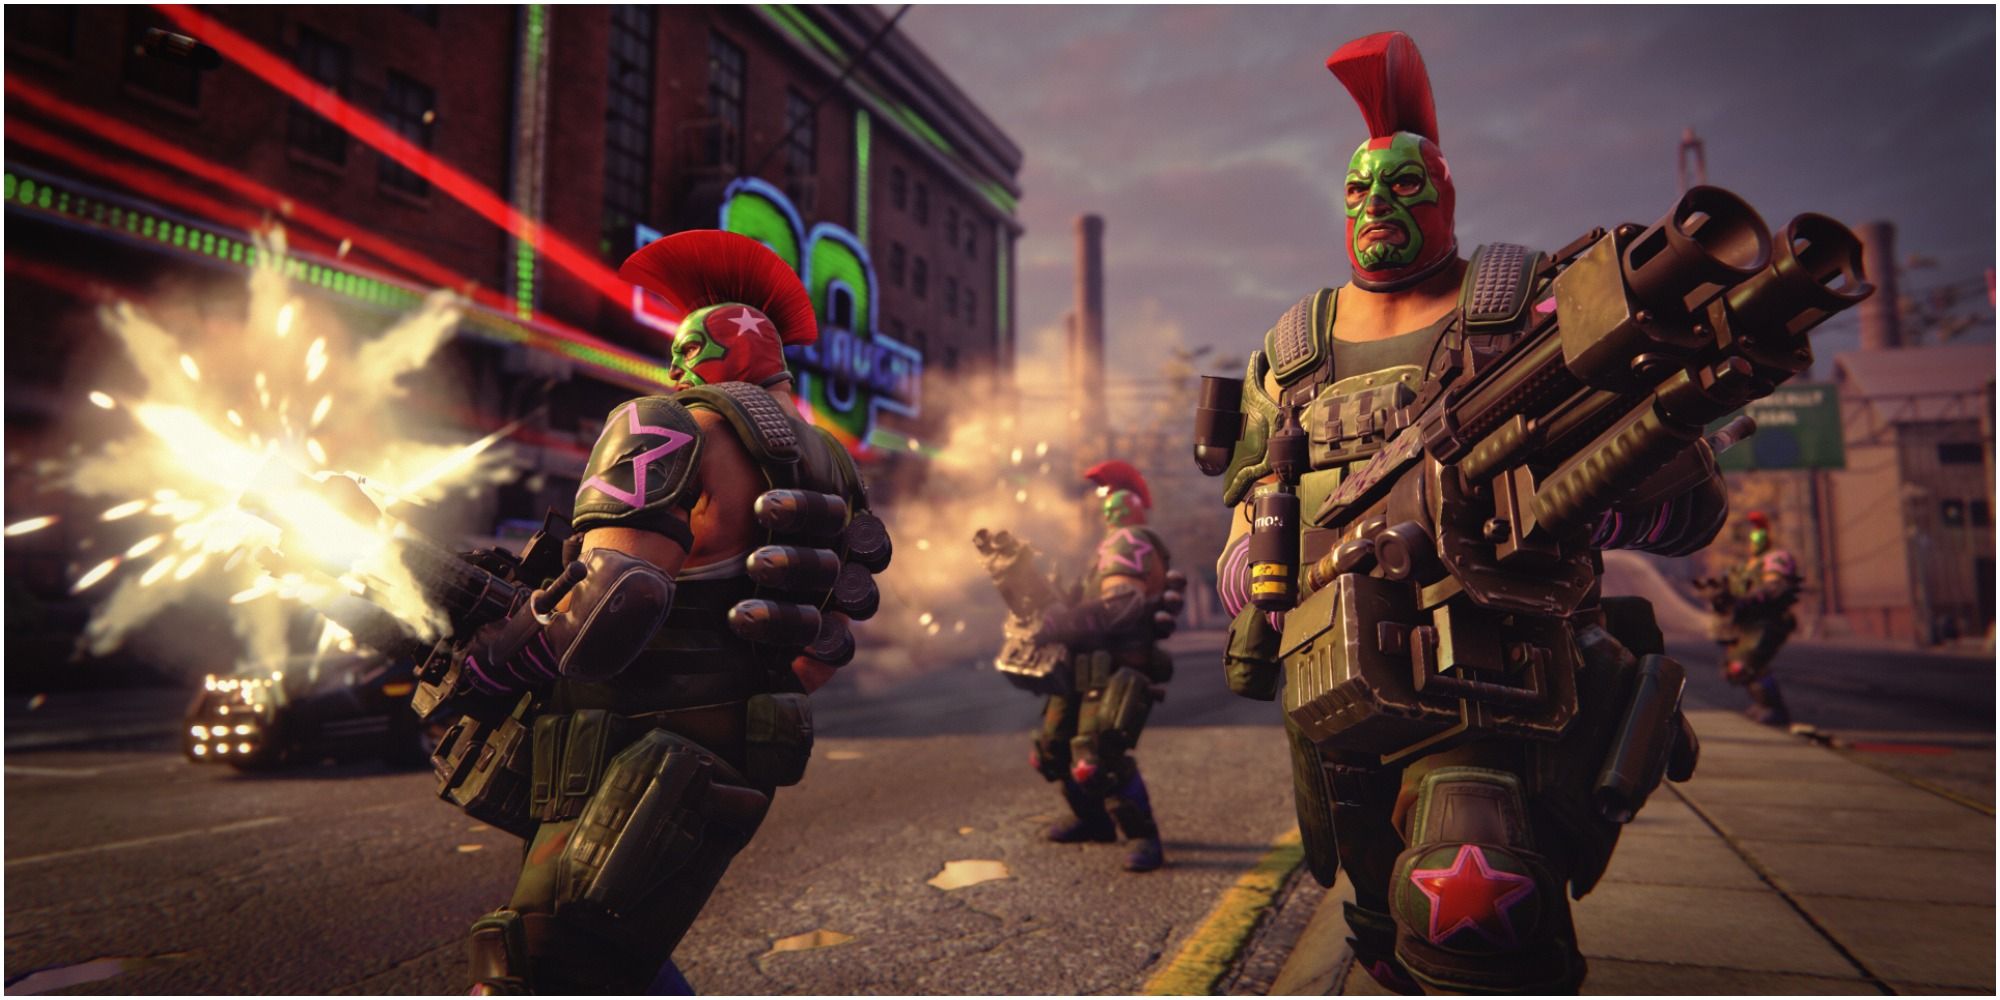 the Luchadores gang going to war in Saints Row 3